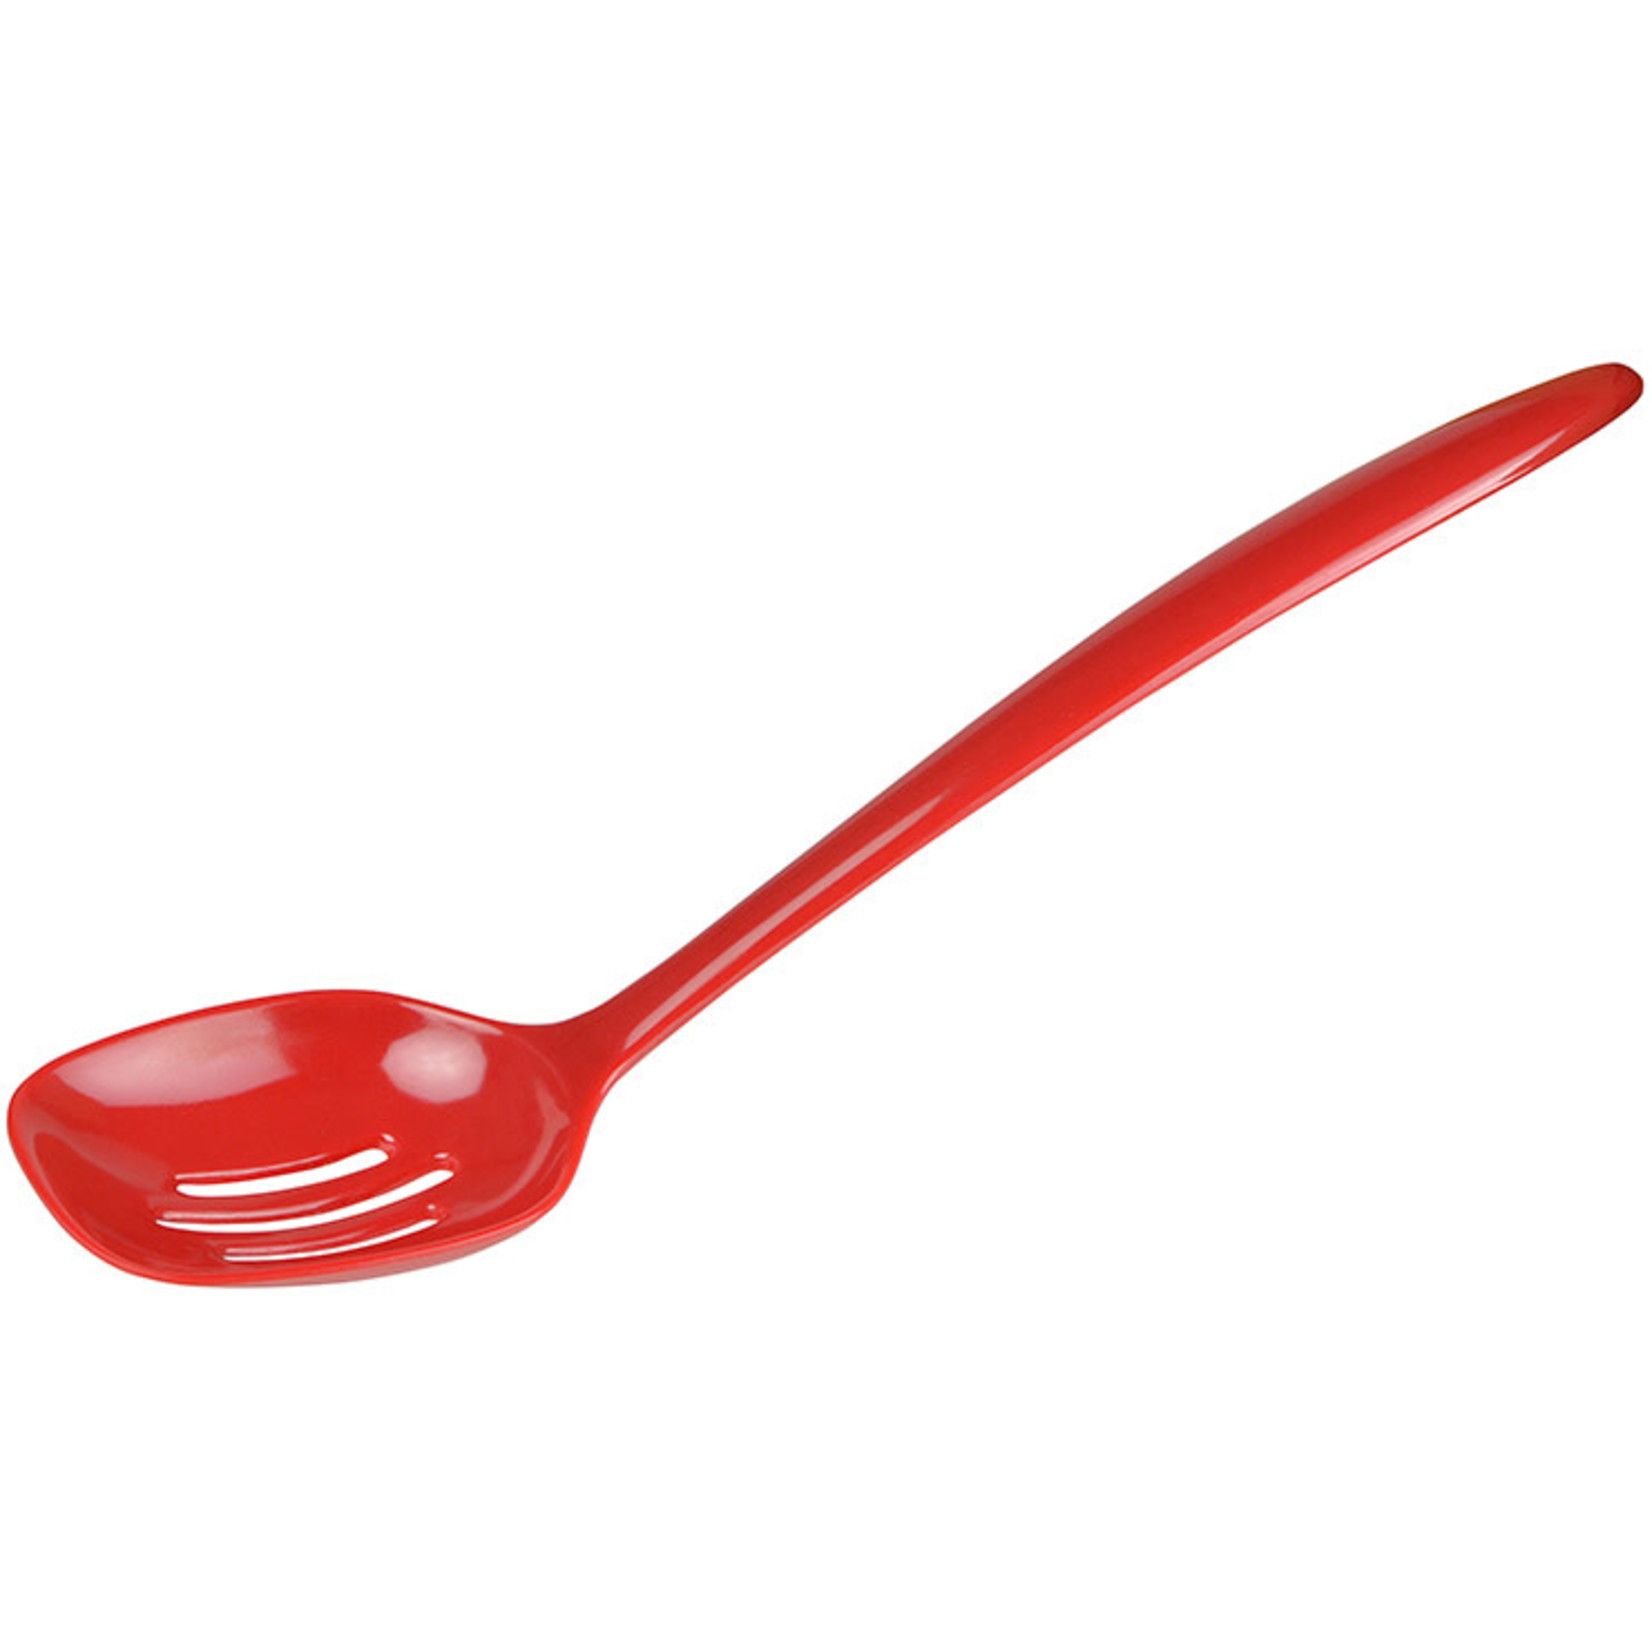 TWS 12" ASSORTED COLOR SLOTTED SPOON